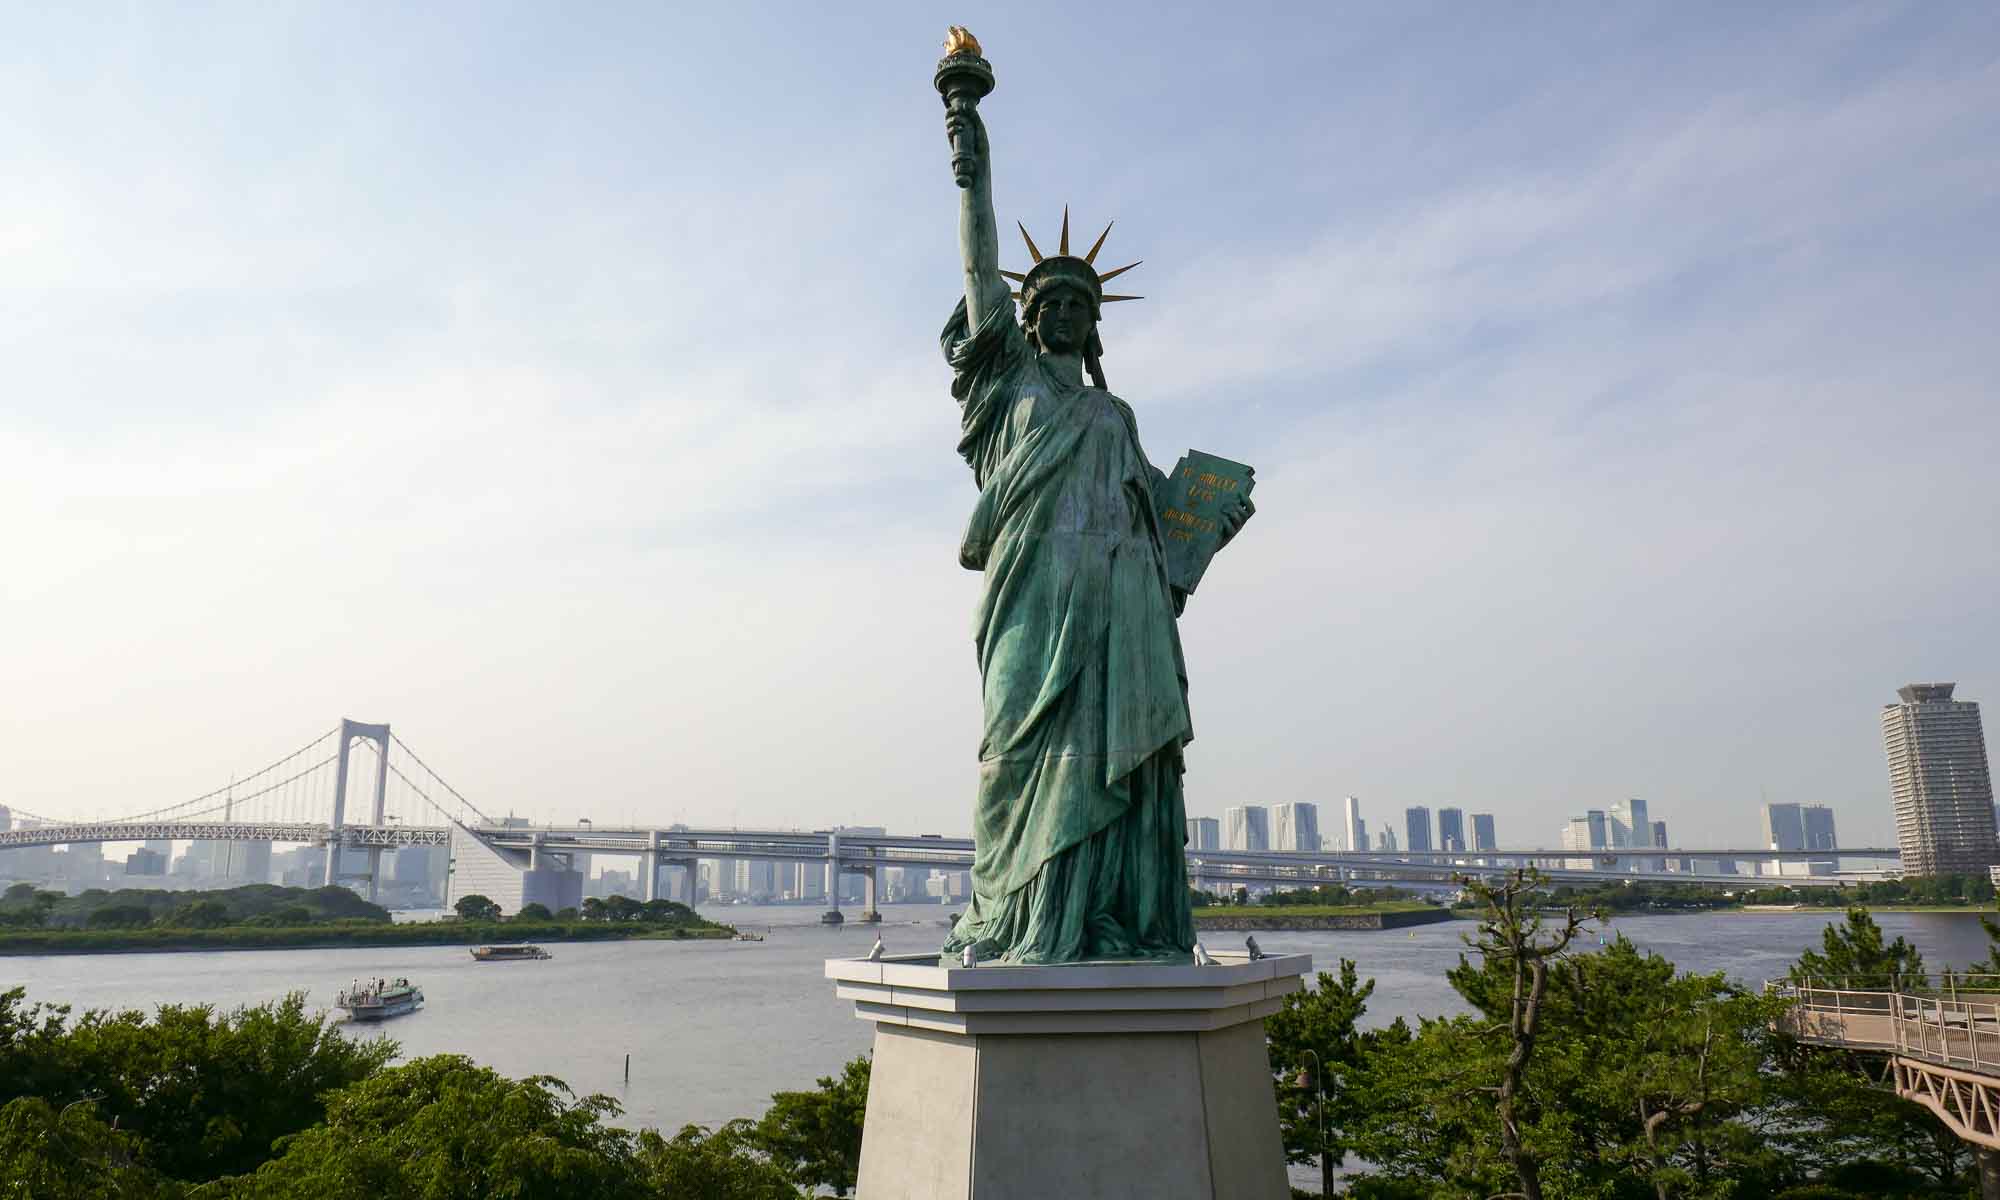 The statue of liberty in Odaiba